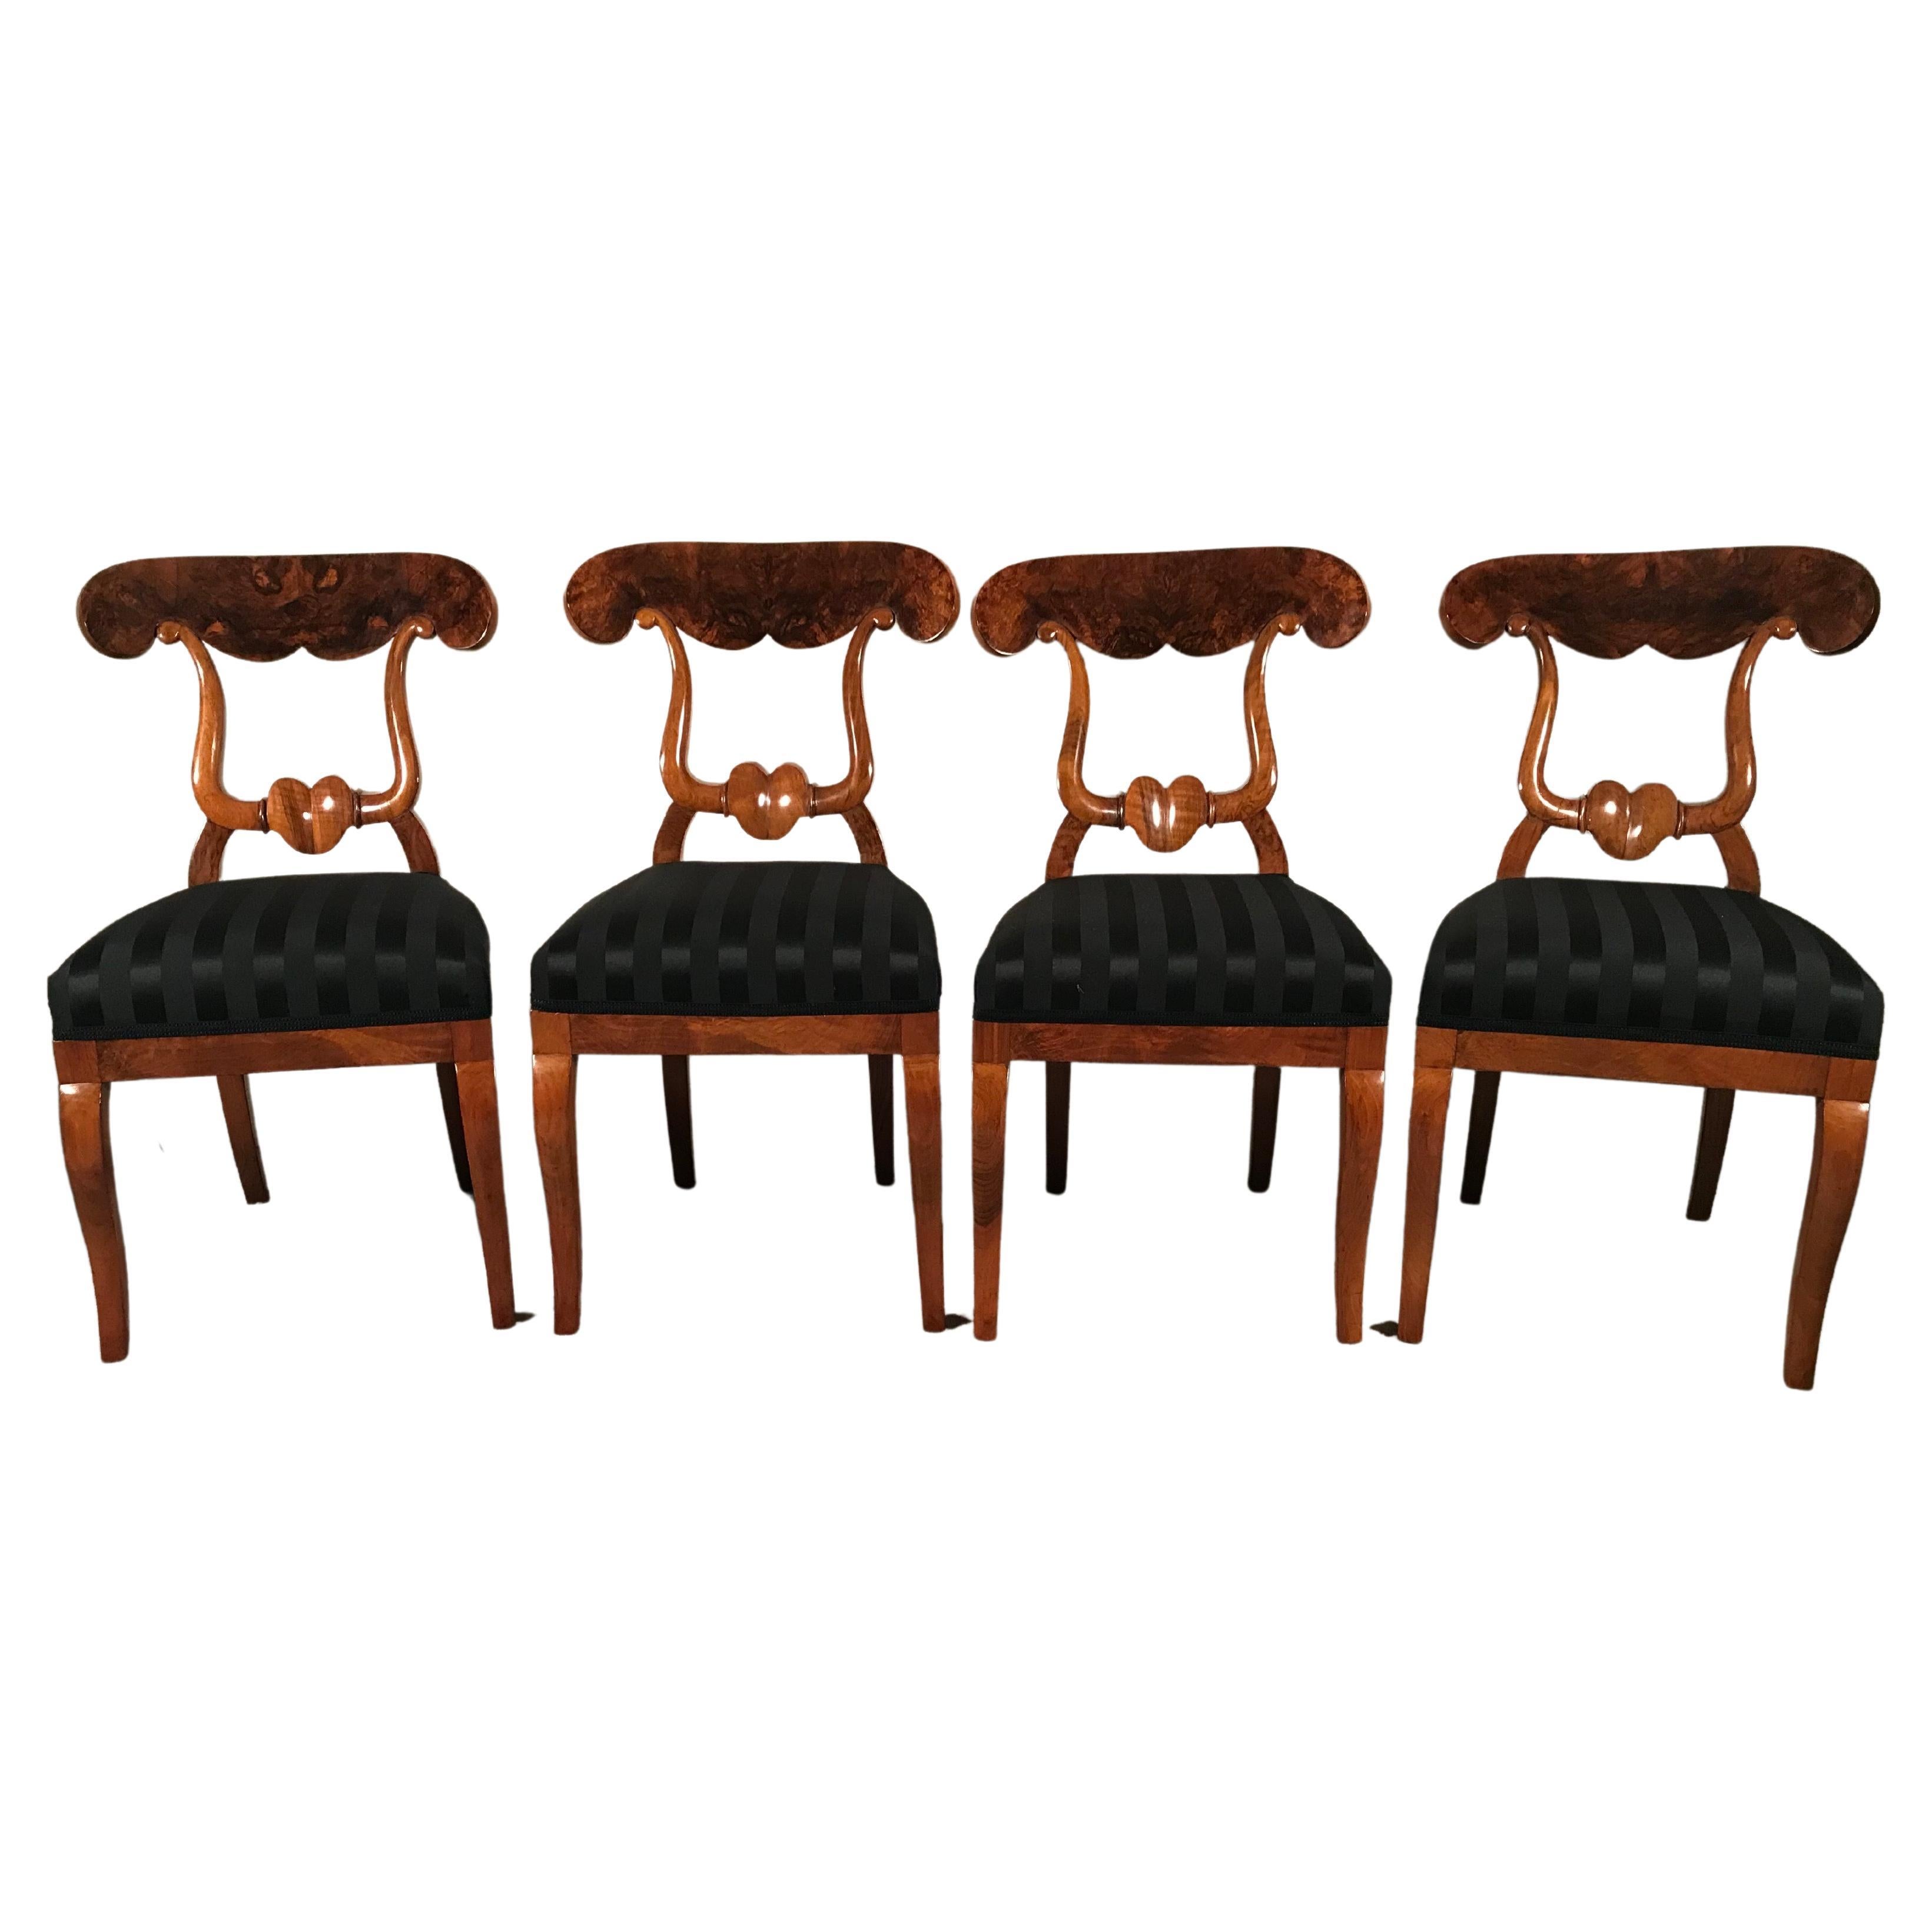 Set of 4 Biedermeier Chairs, South Germany 1820-30, Walnut In Good Condition For Sale In Belmont, MA